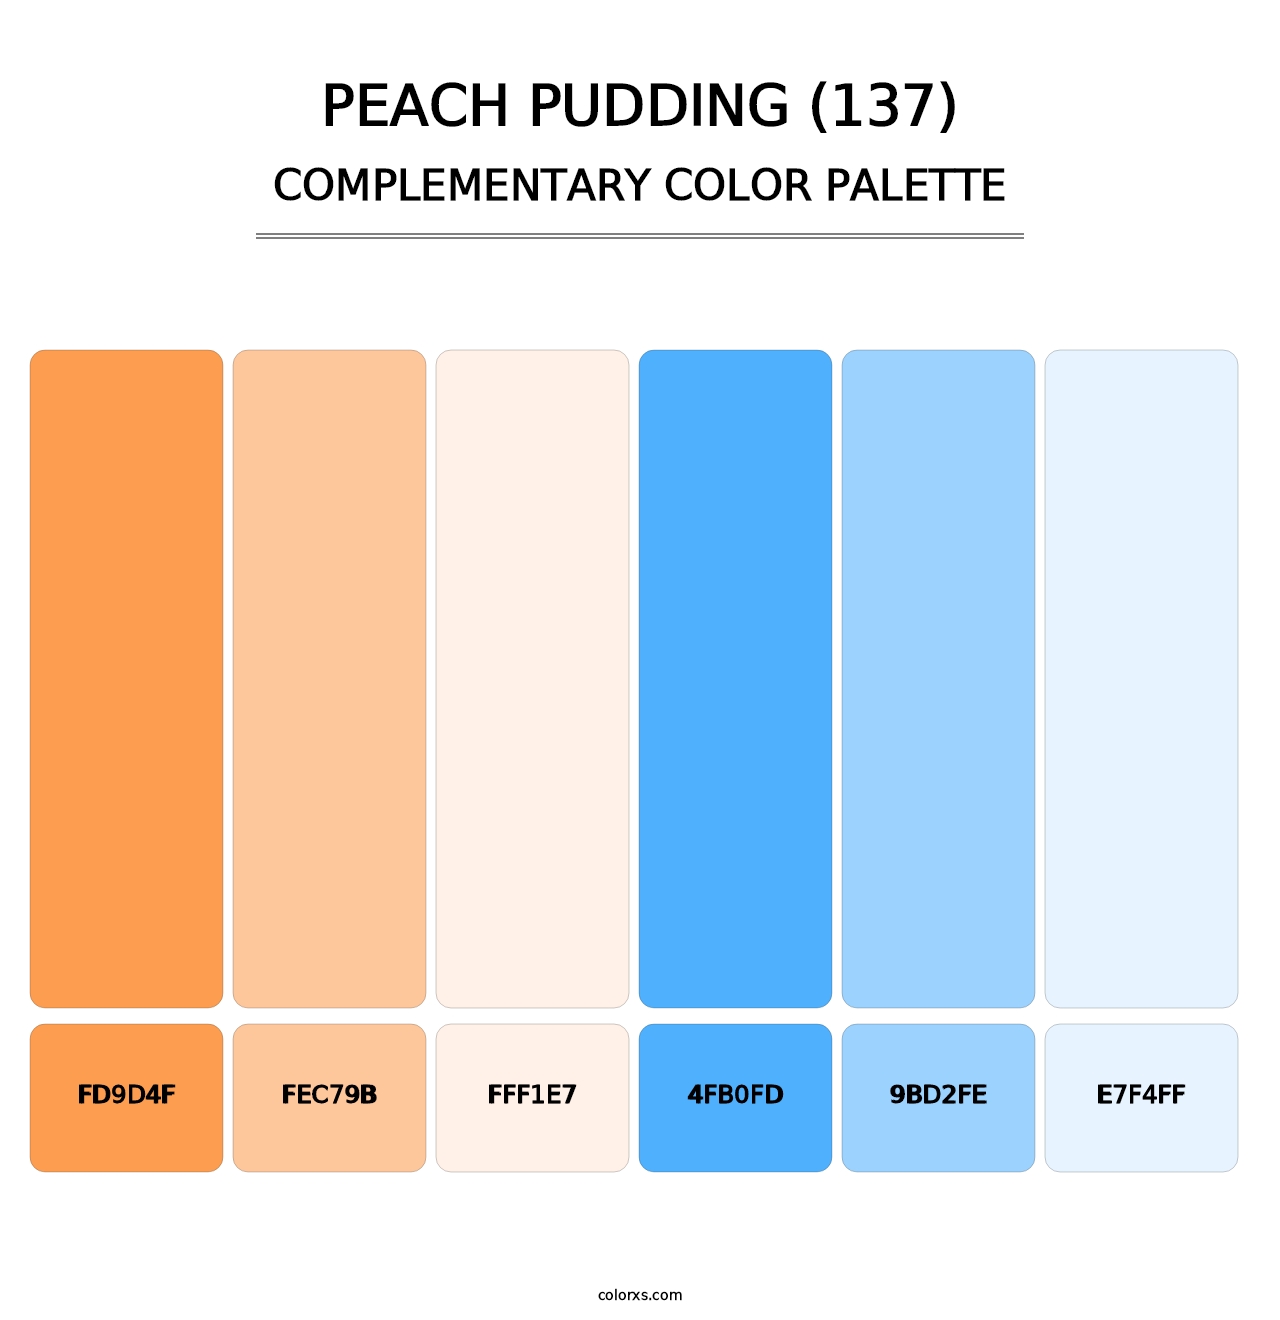 Peach Pudding (137) - Complementary Color Palette